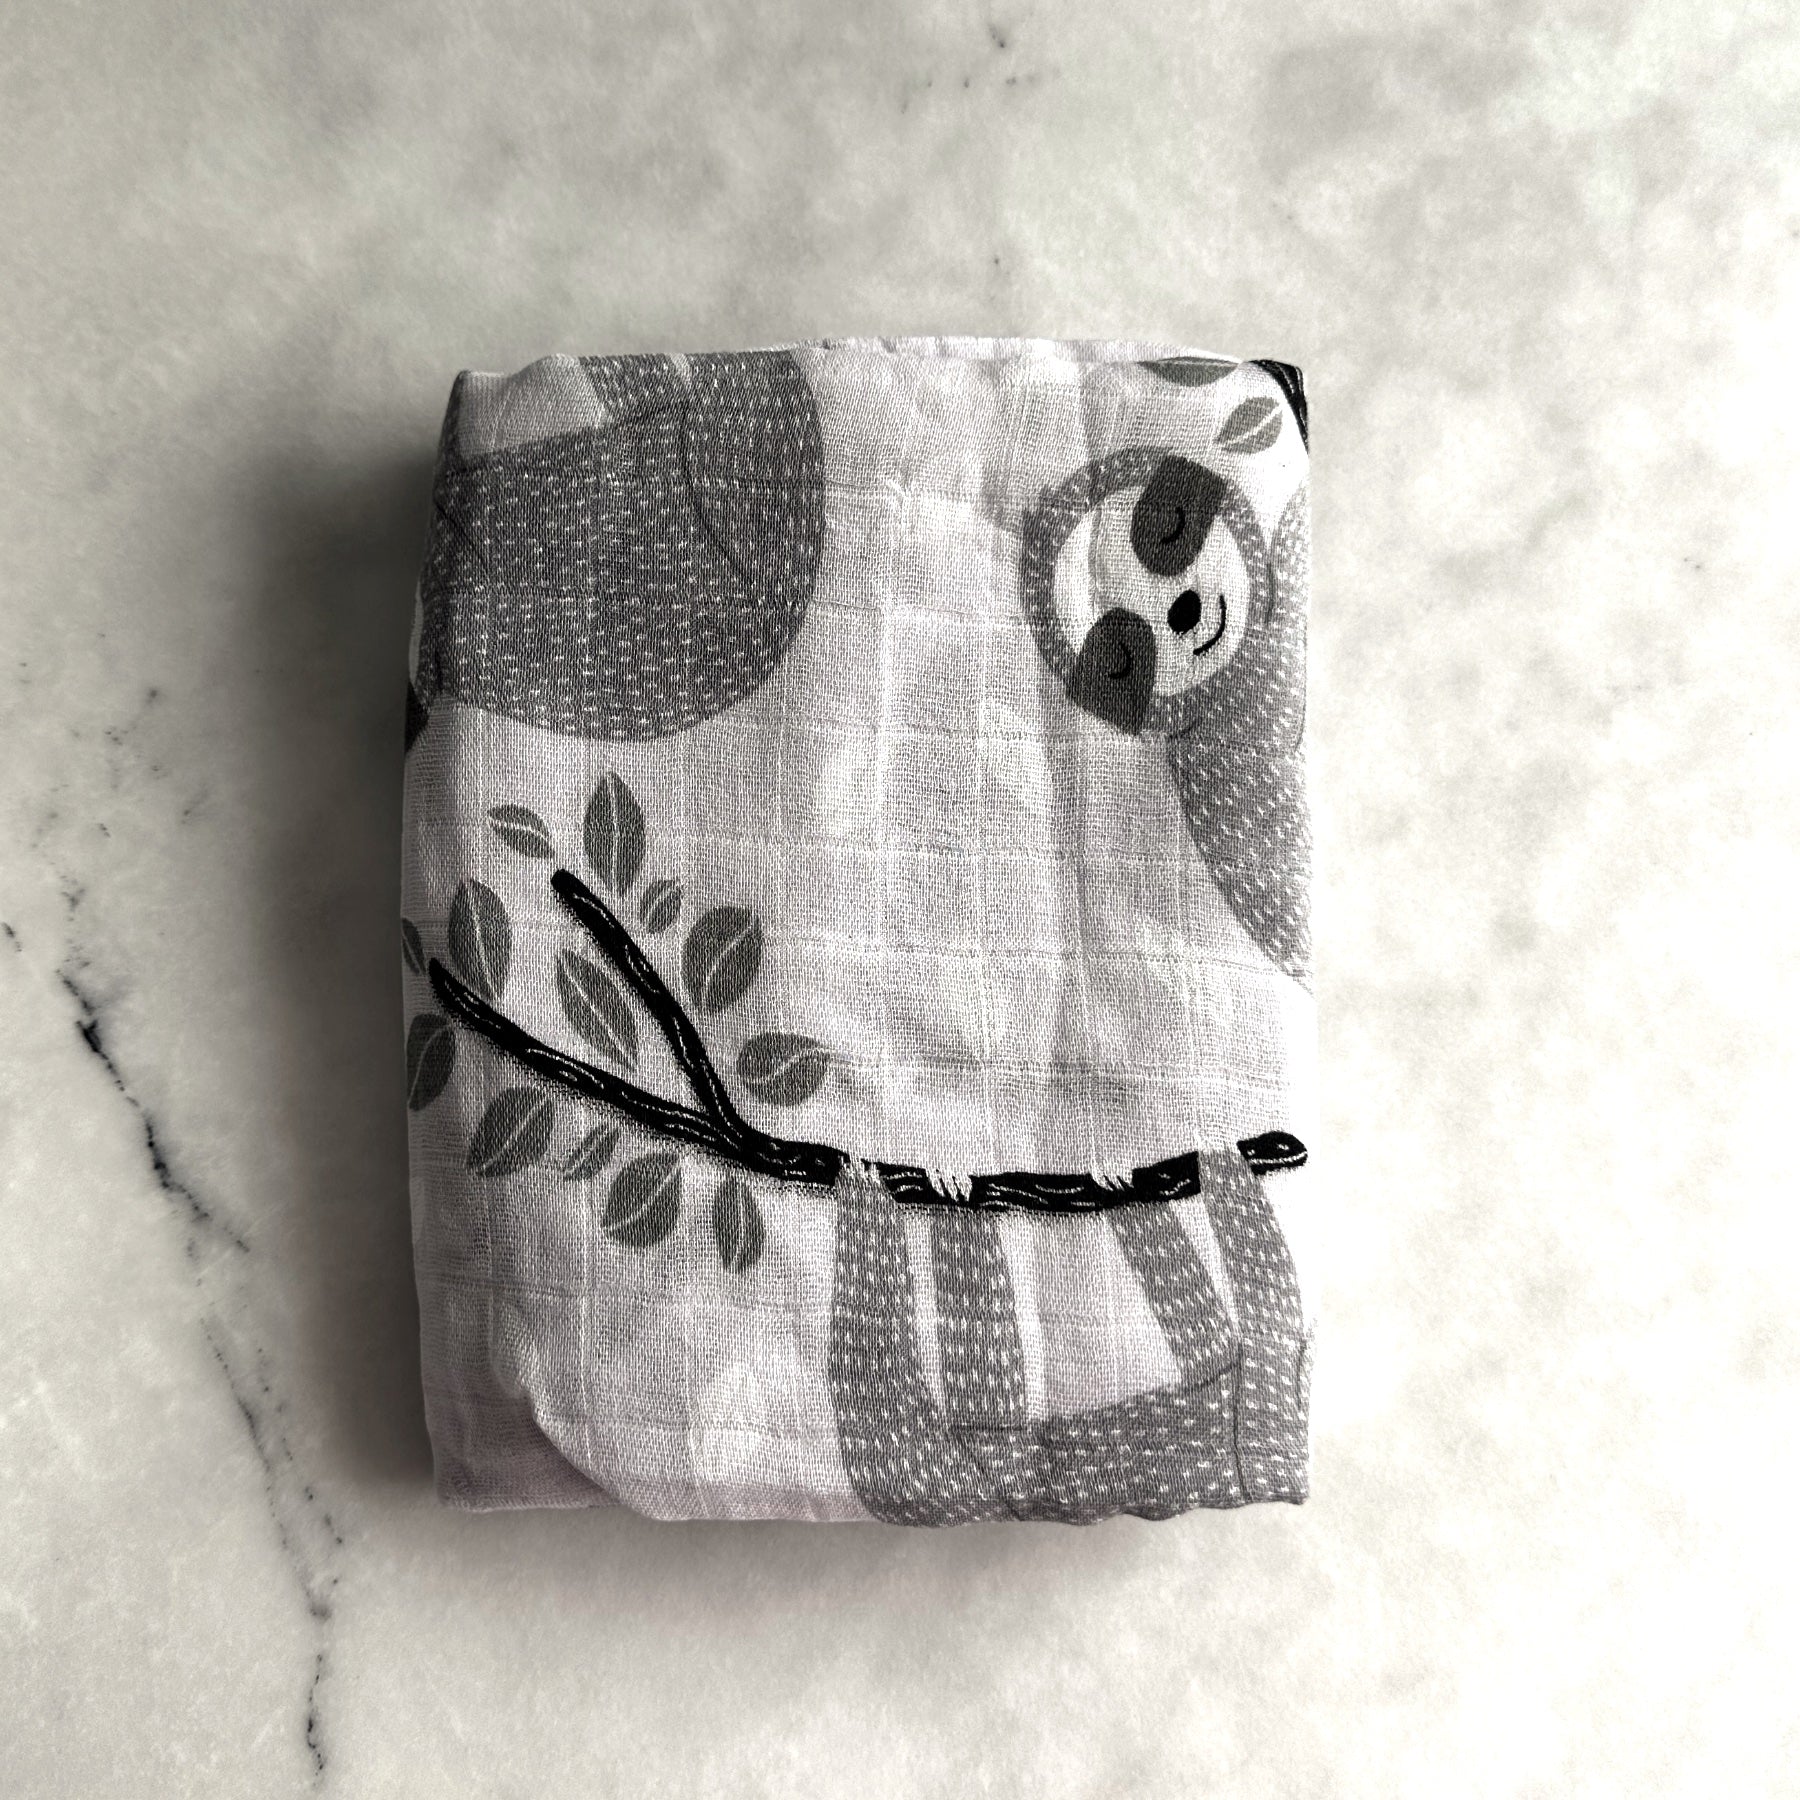 Sleepy Sloth Swaddle - Baby Swaddles & Wraps at Louie Meets Lola